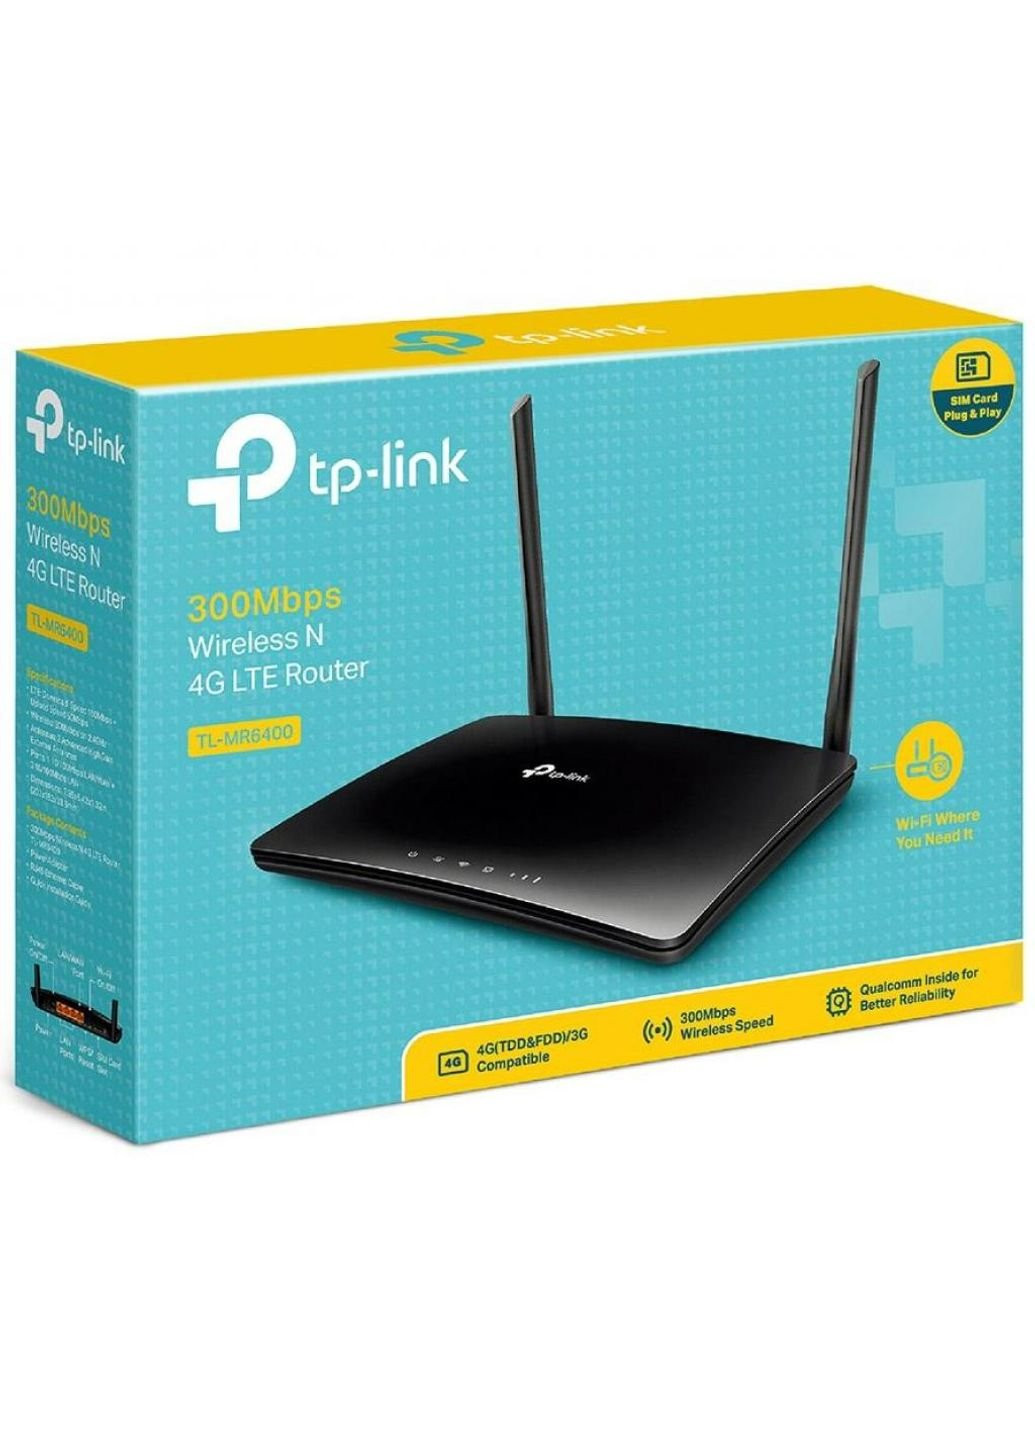 Маршрутизатор TL-MR6400 TP-Link (250096579)